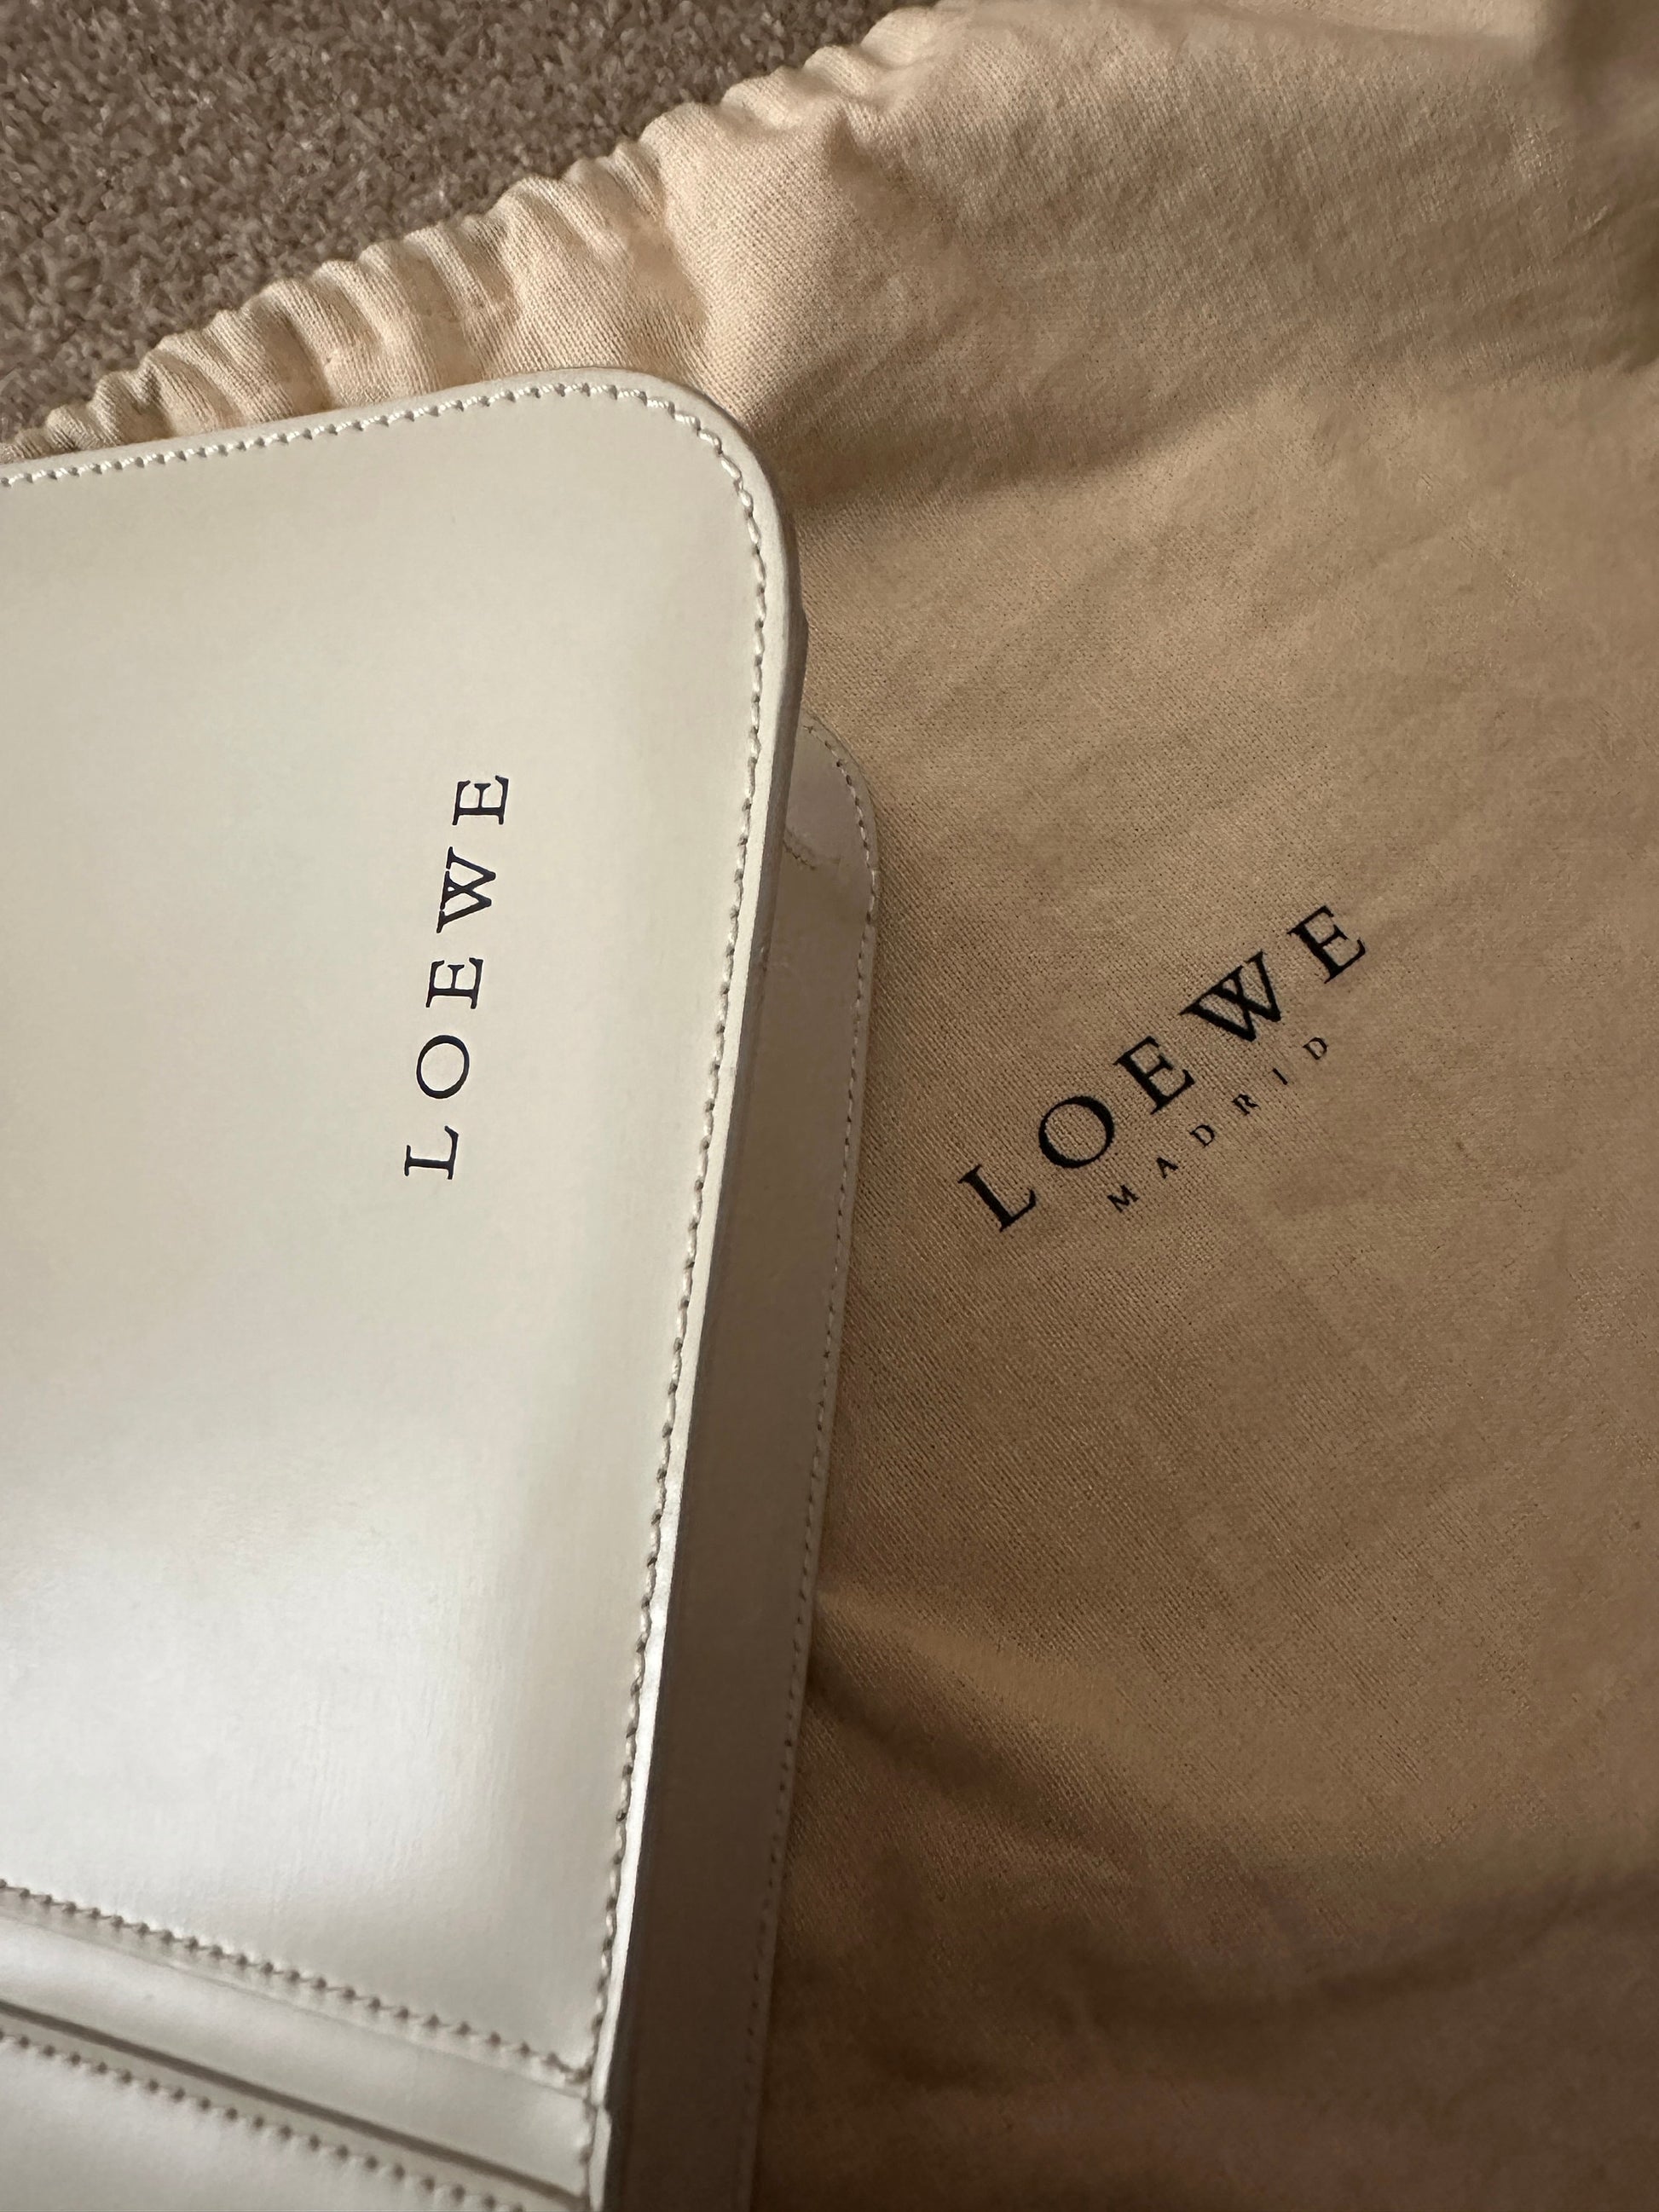 LOEWE VINTAGE 100% Authentic Genuine Leather Hand Bag, Off White, 2000, Great Condition, Rare